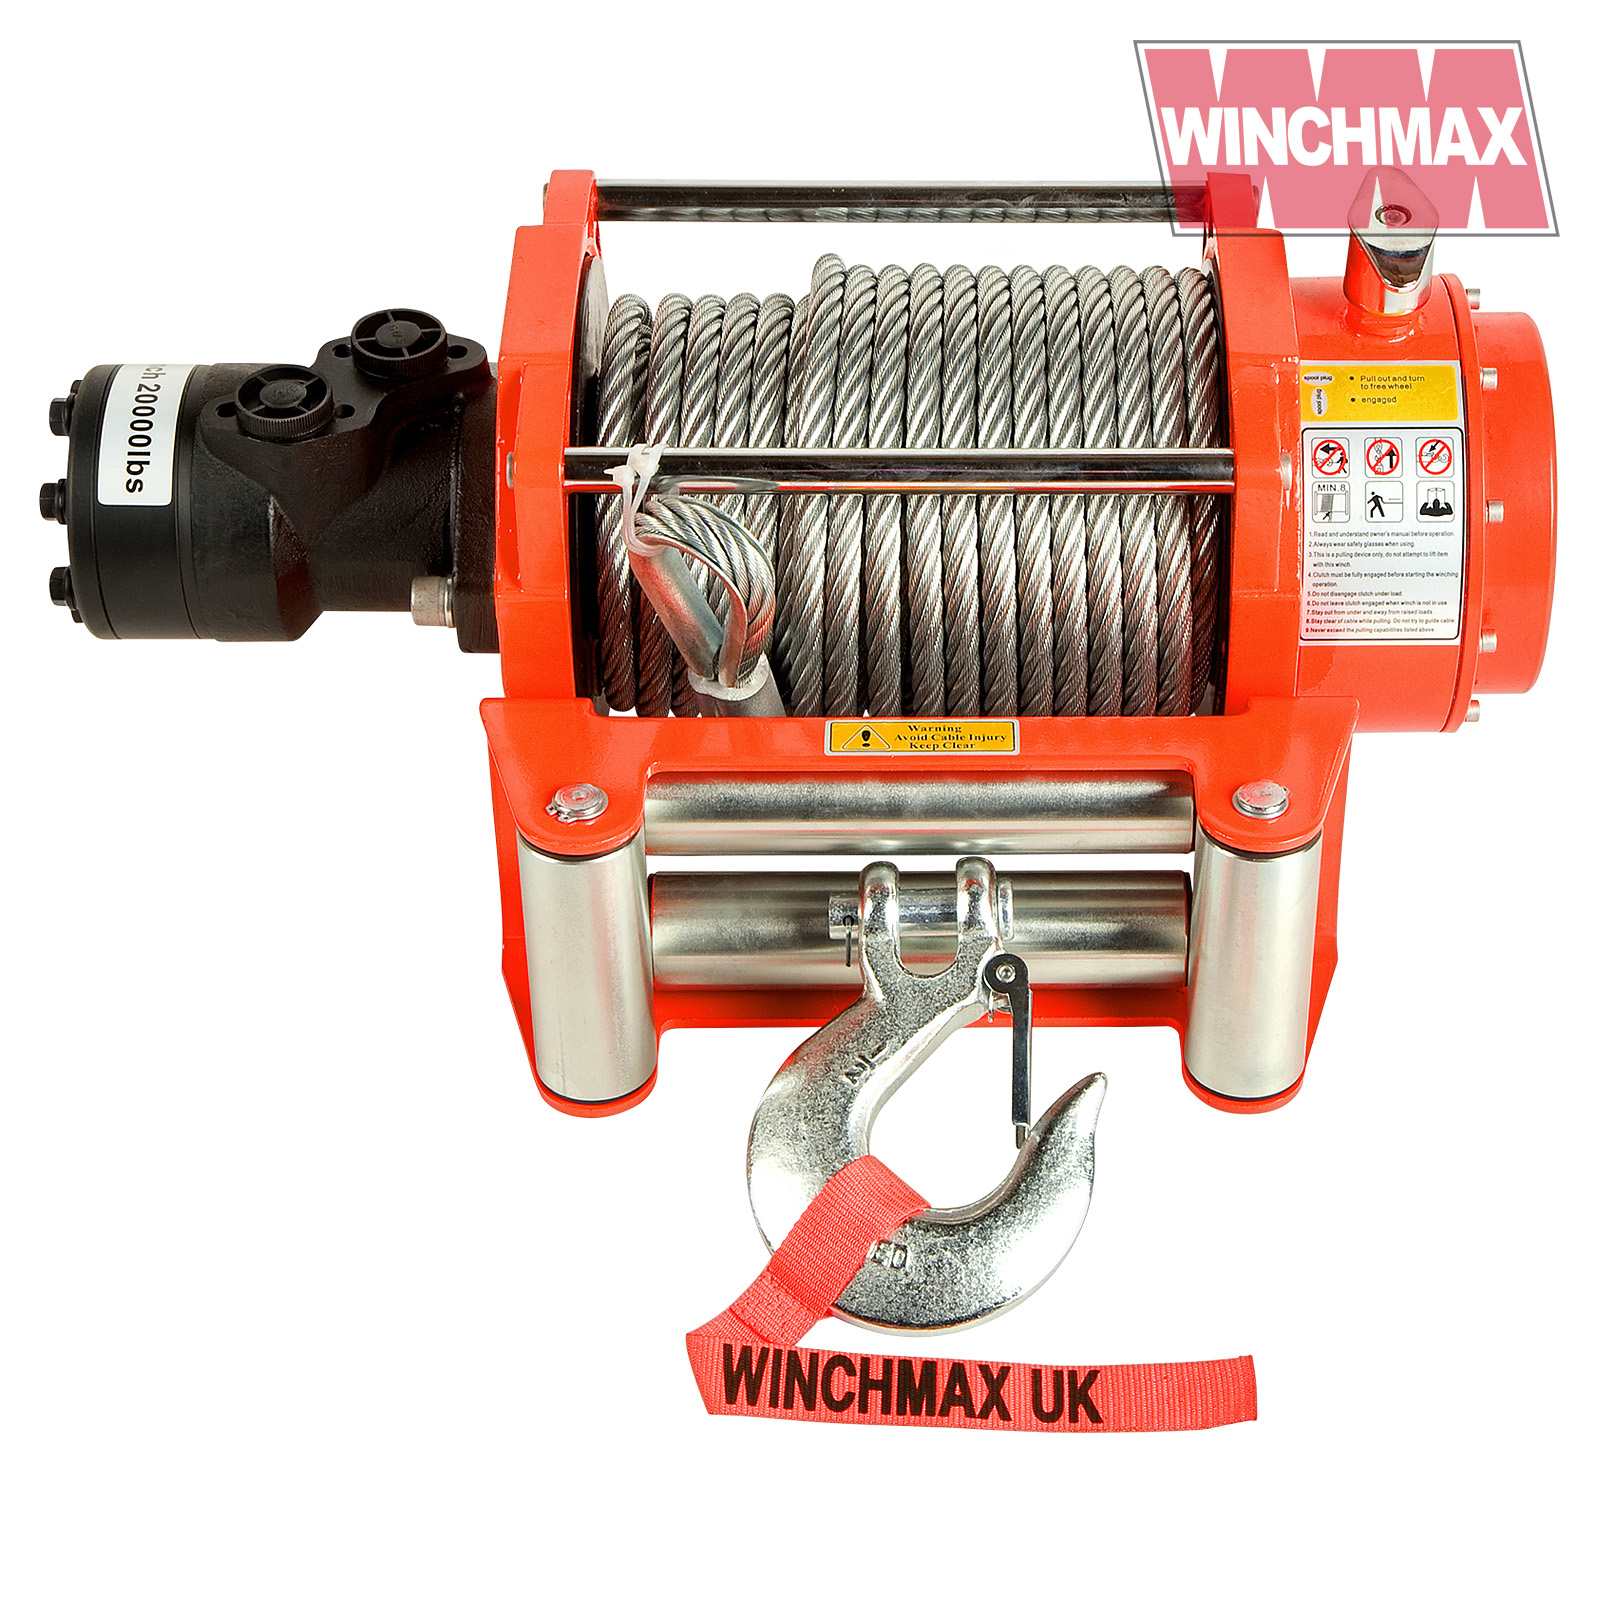 Winchmax 20000lb Hydraulic Winch. Steel Rope and Clevis Hook